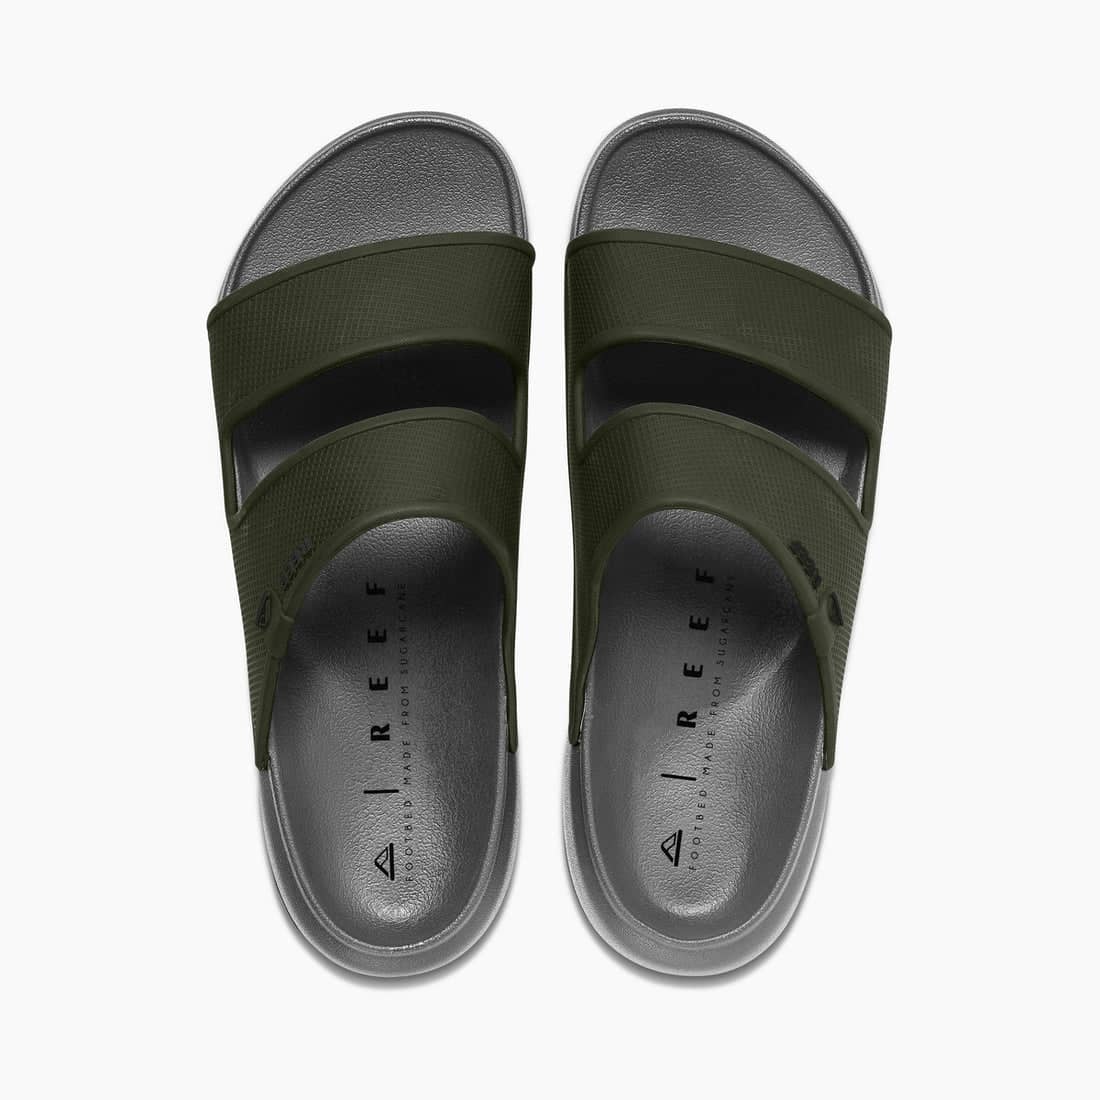 OASIS DOUBLE UP GREY/OLIVE